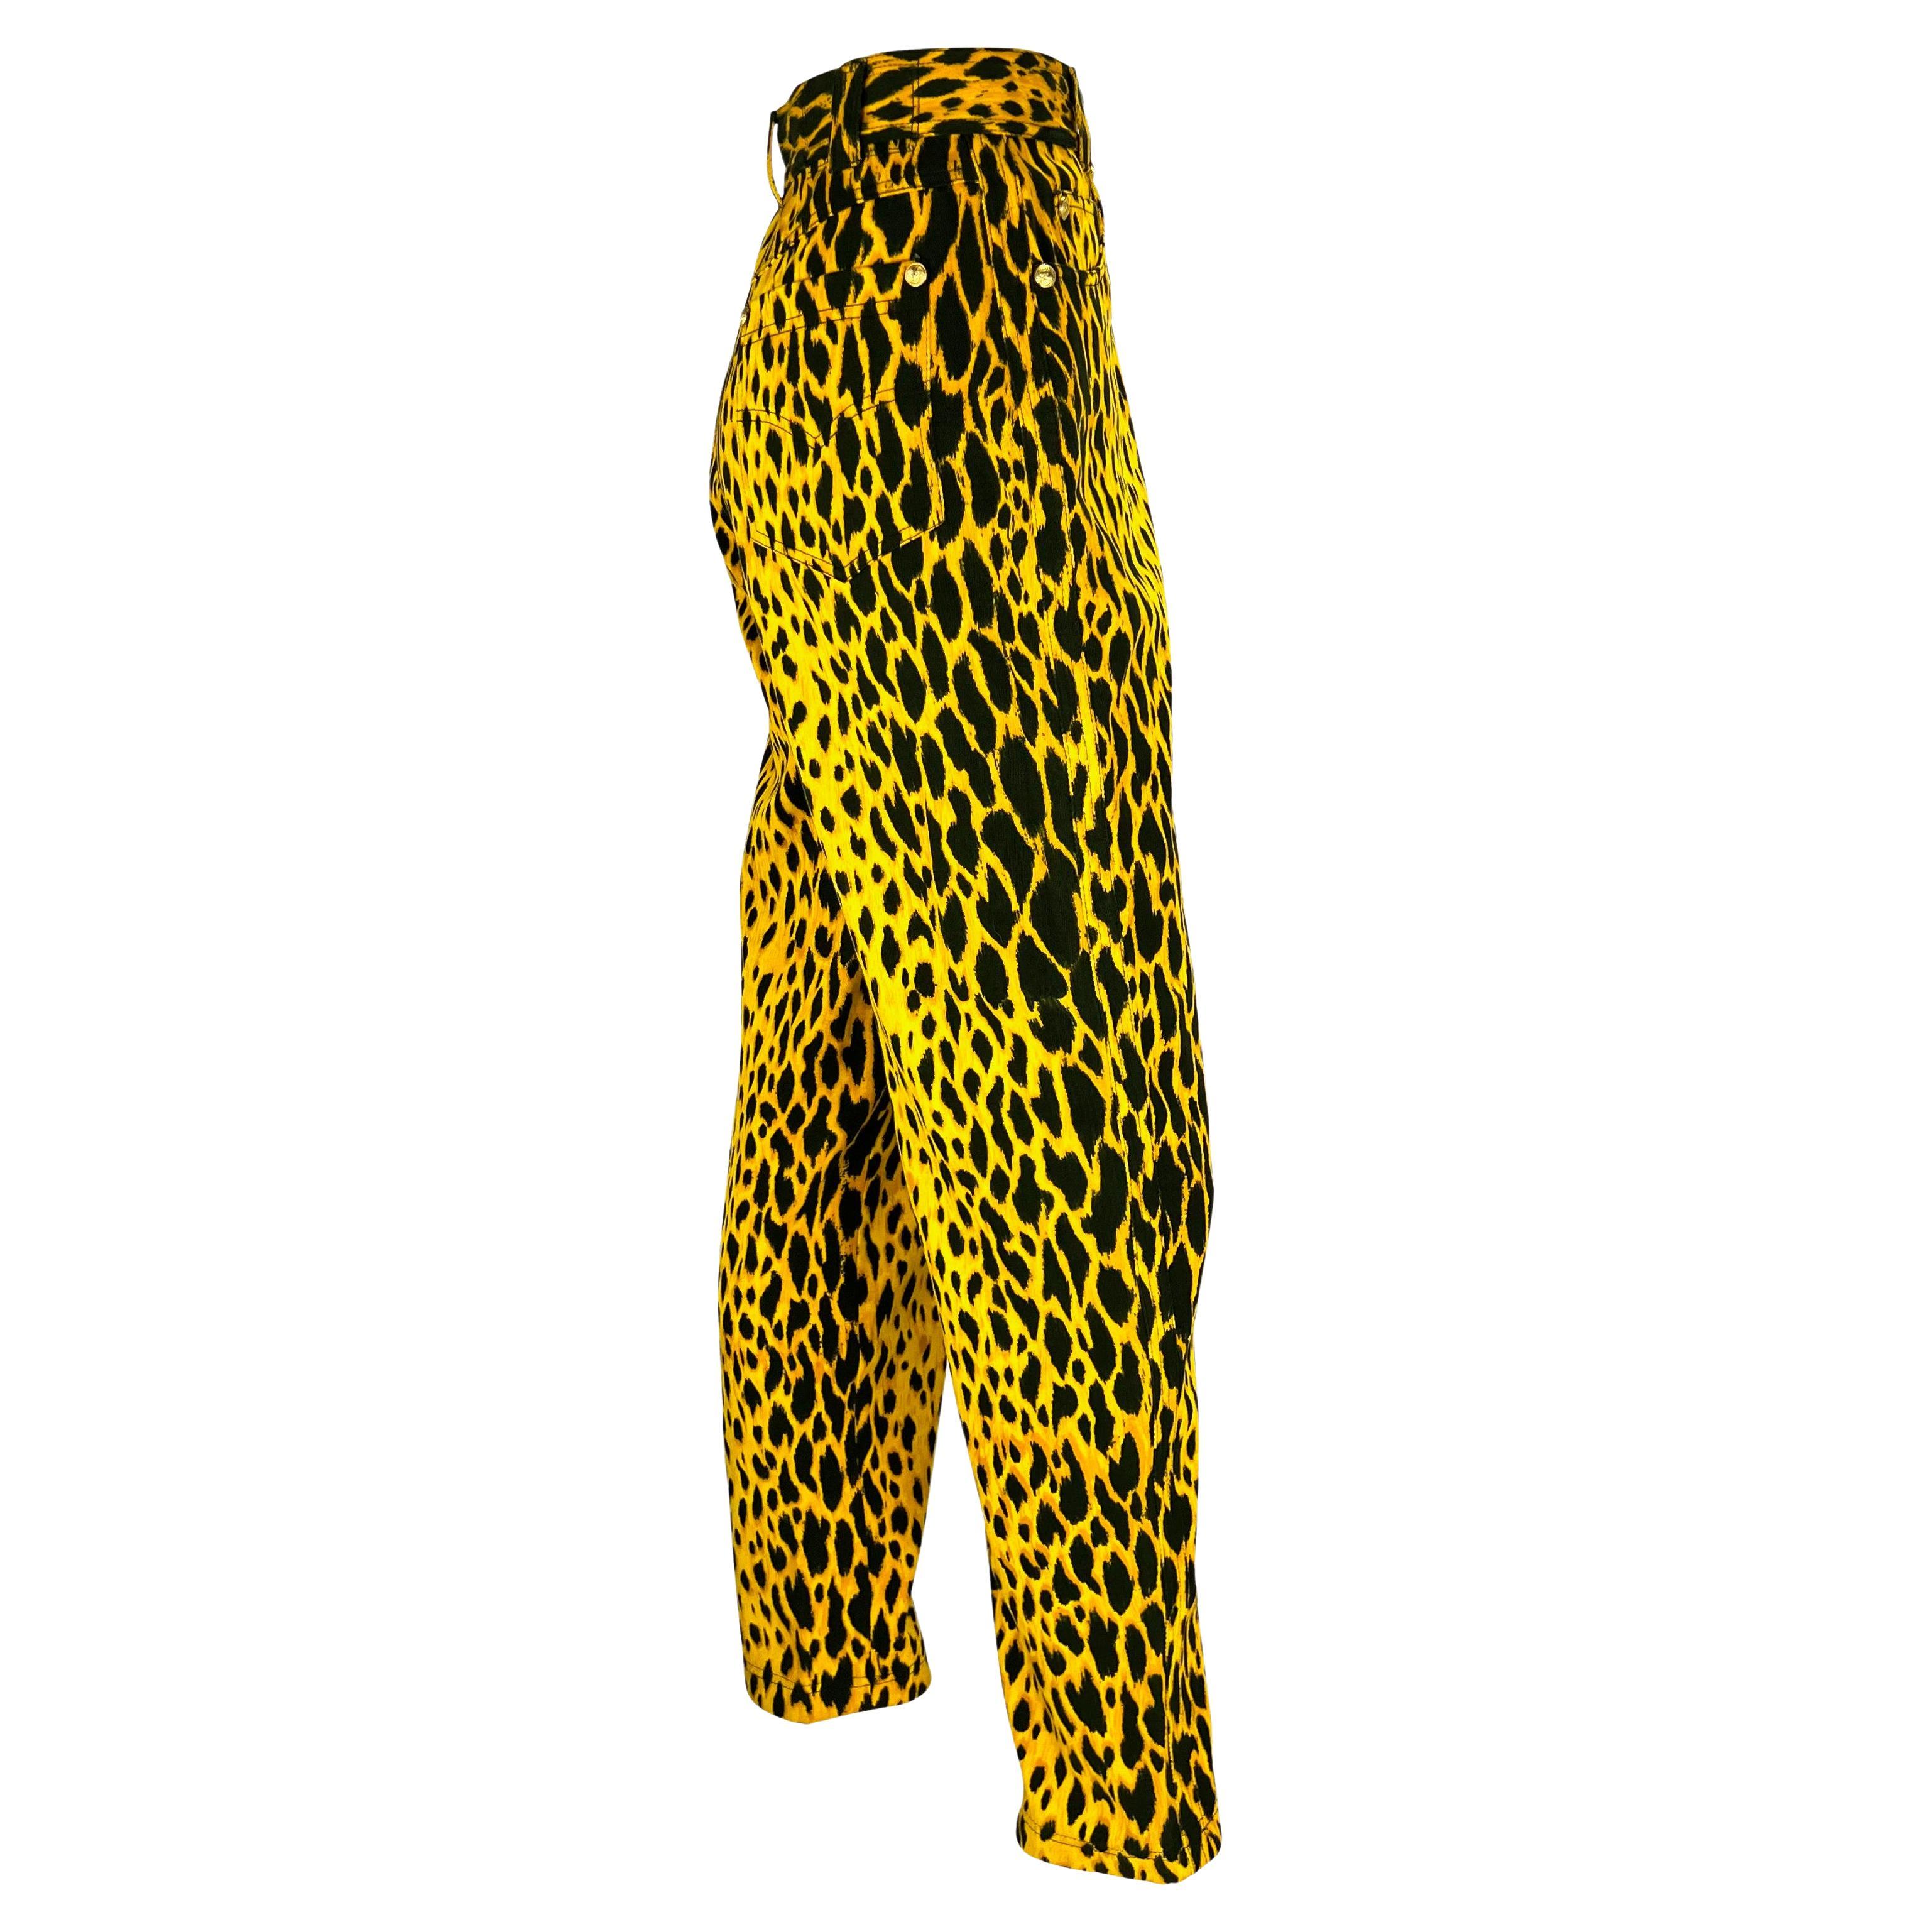 S/S 1992 Gianni Versace Runway Cheetah Print Yellow Black Cotton Stretch Jeans For Sale 1